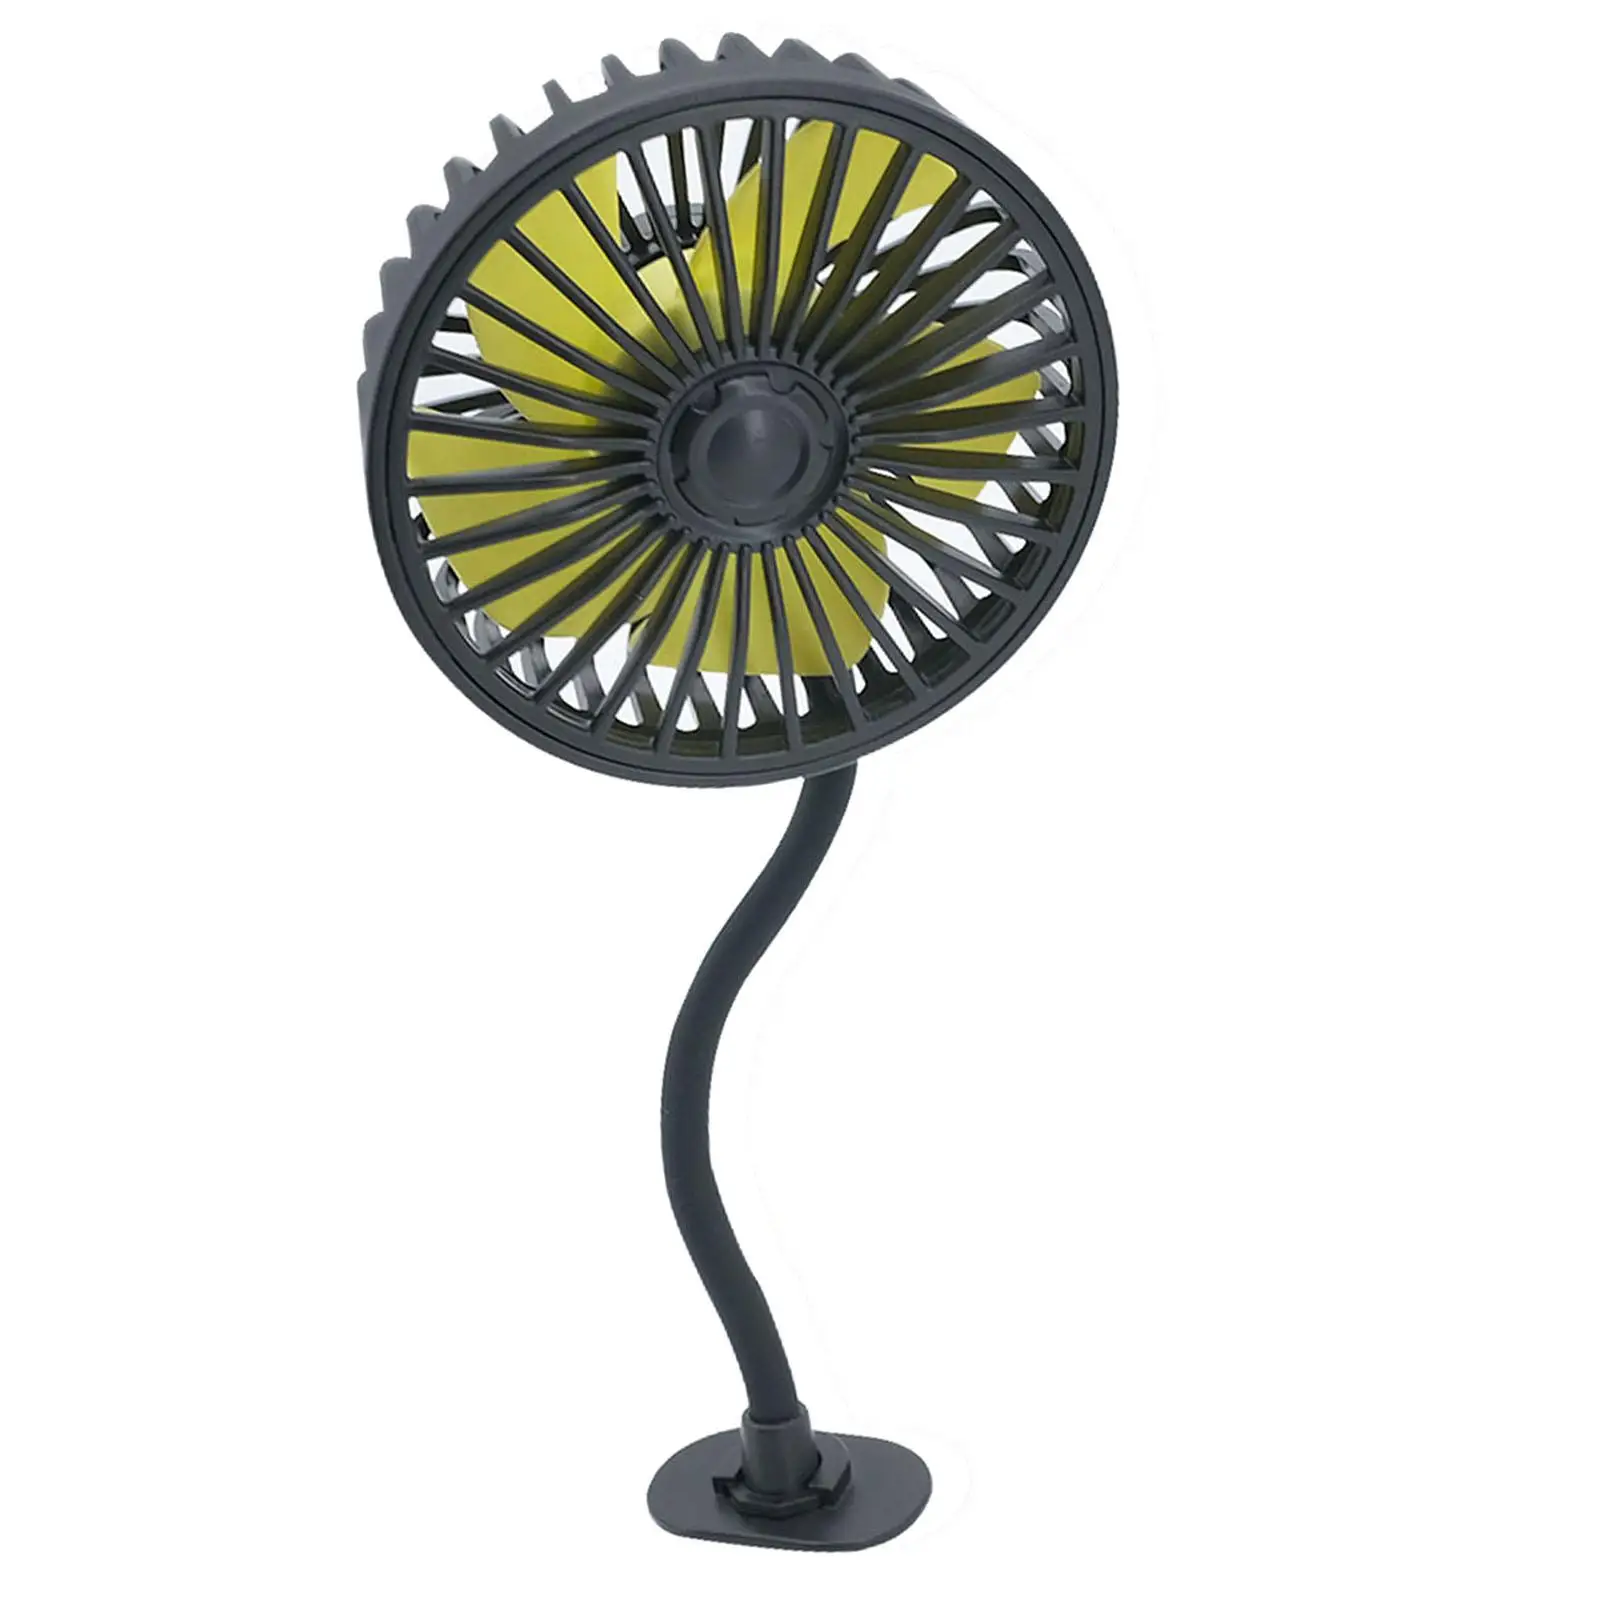 USB Powered Electric Car Cooling Fan Cooler for Outdoor, Vehicles,